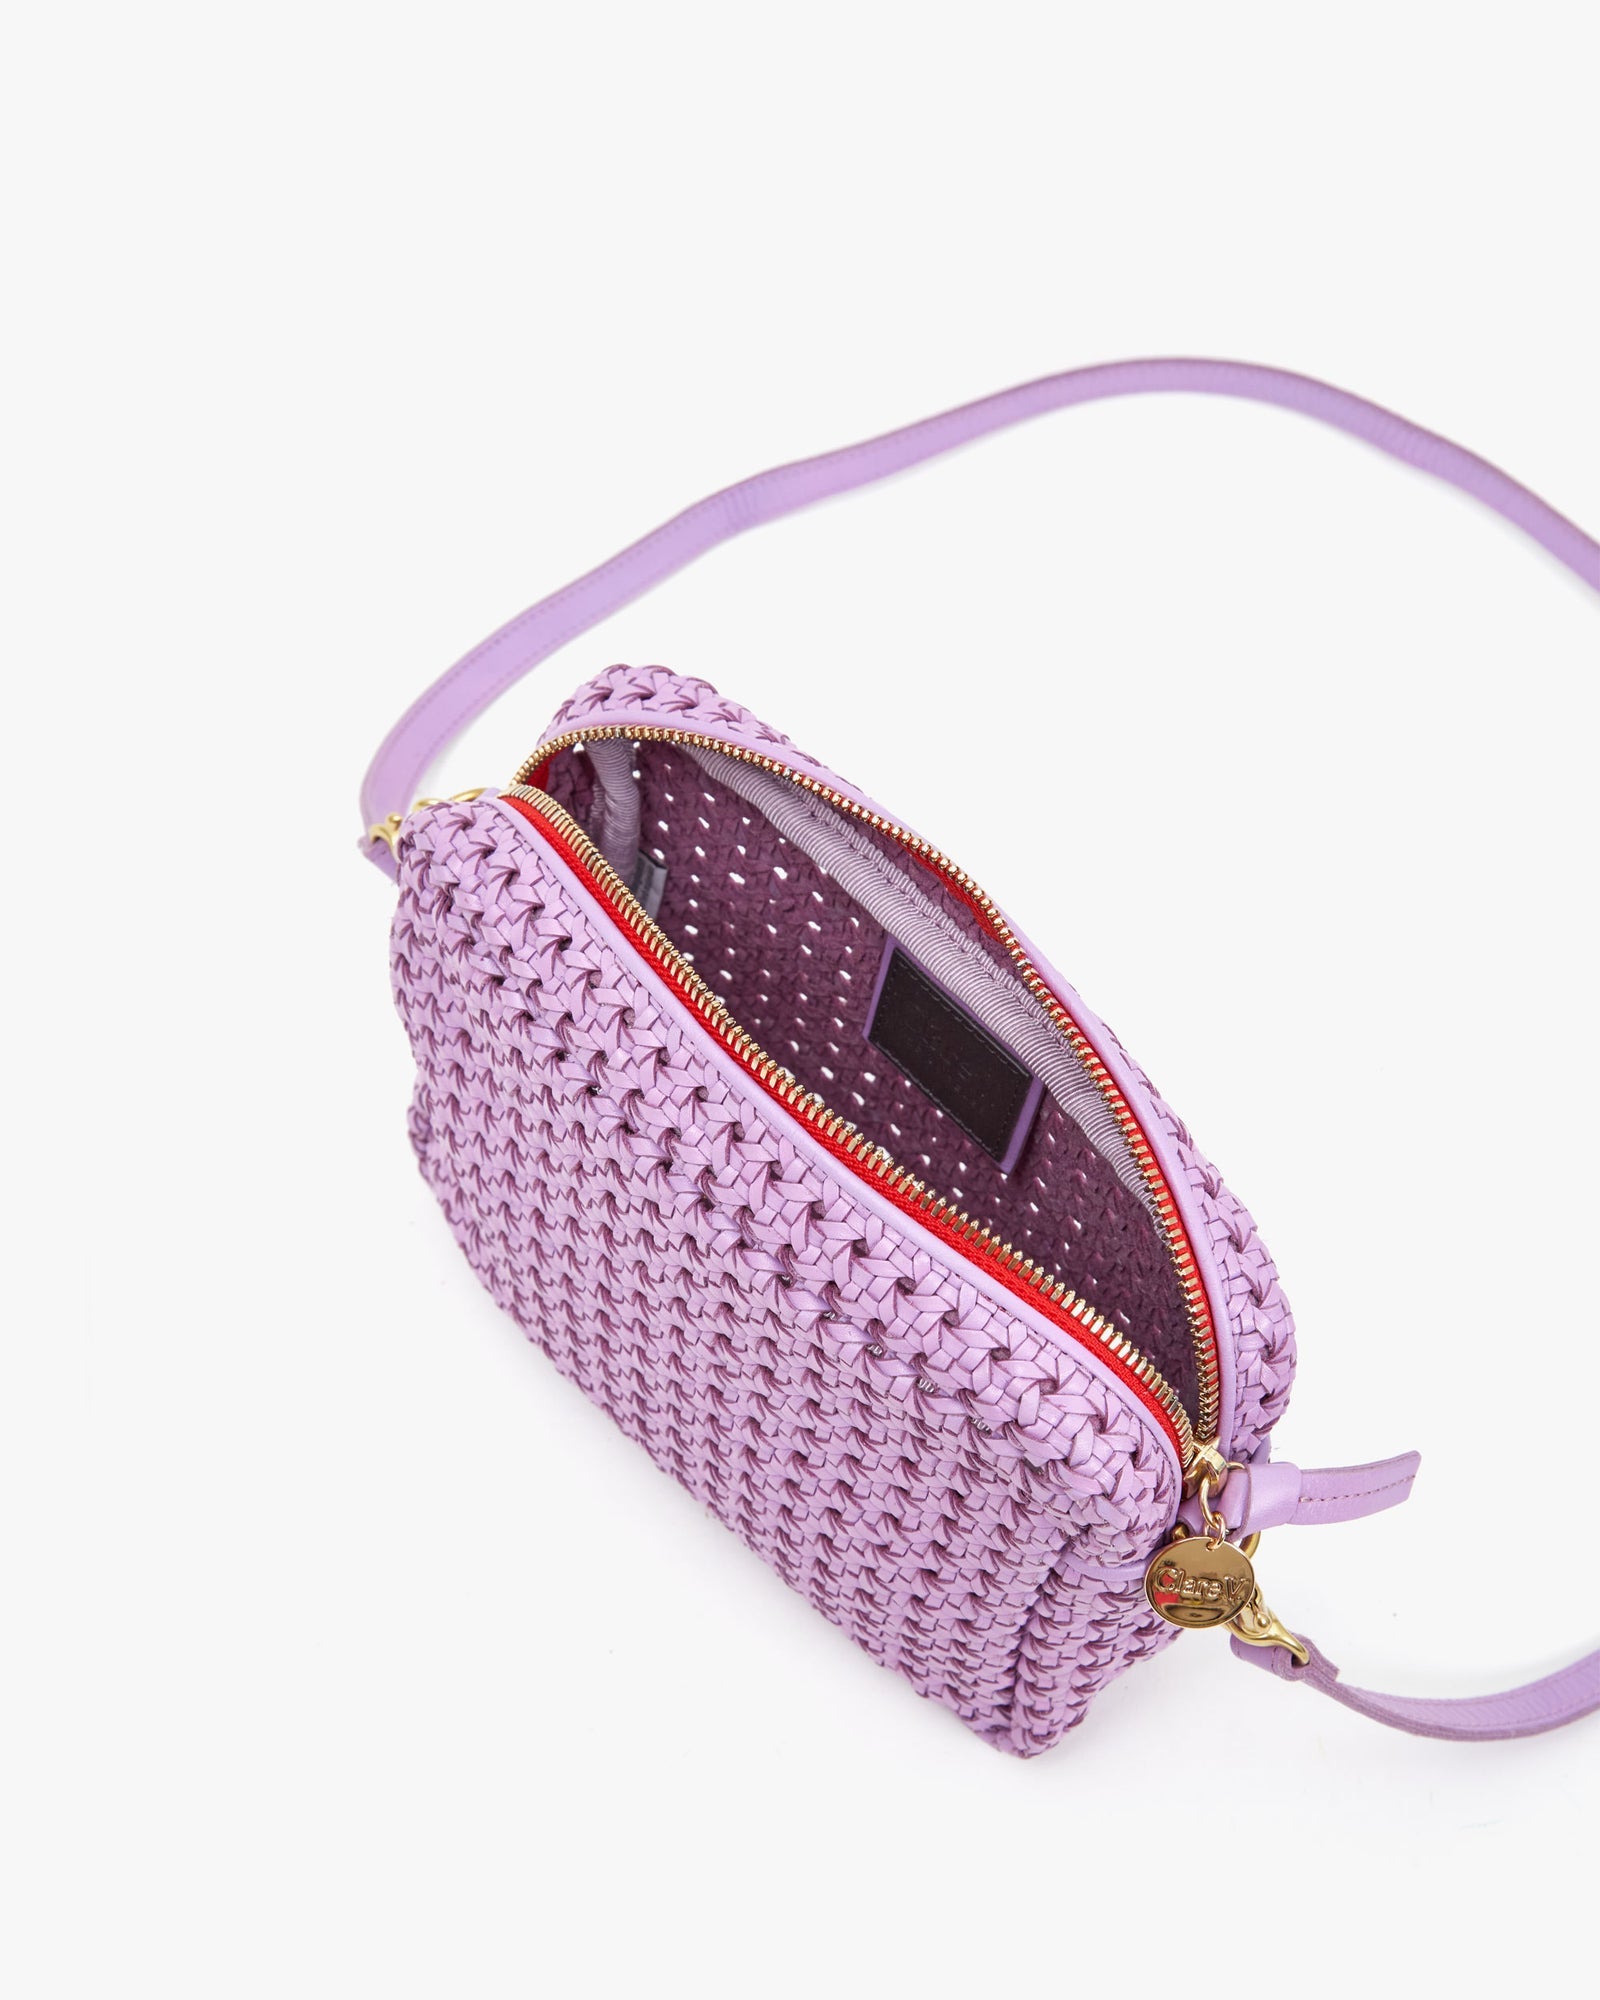 Clare V. Marisol Woven Leather Crossbody Bag in Toffee Diagonal